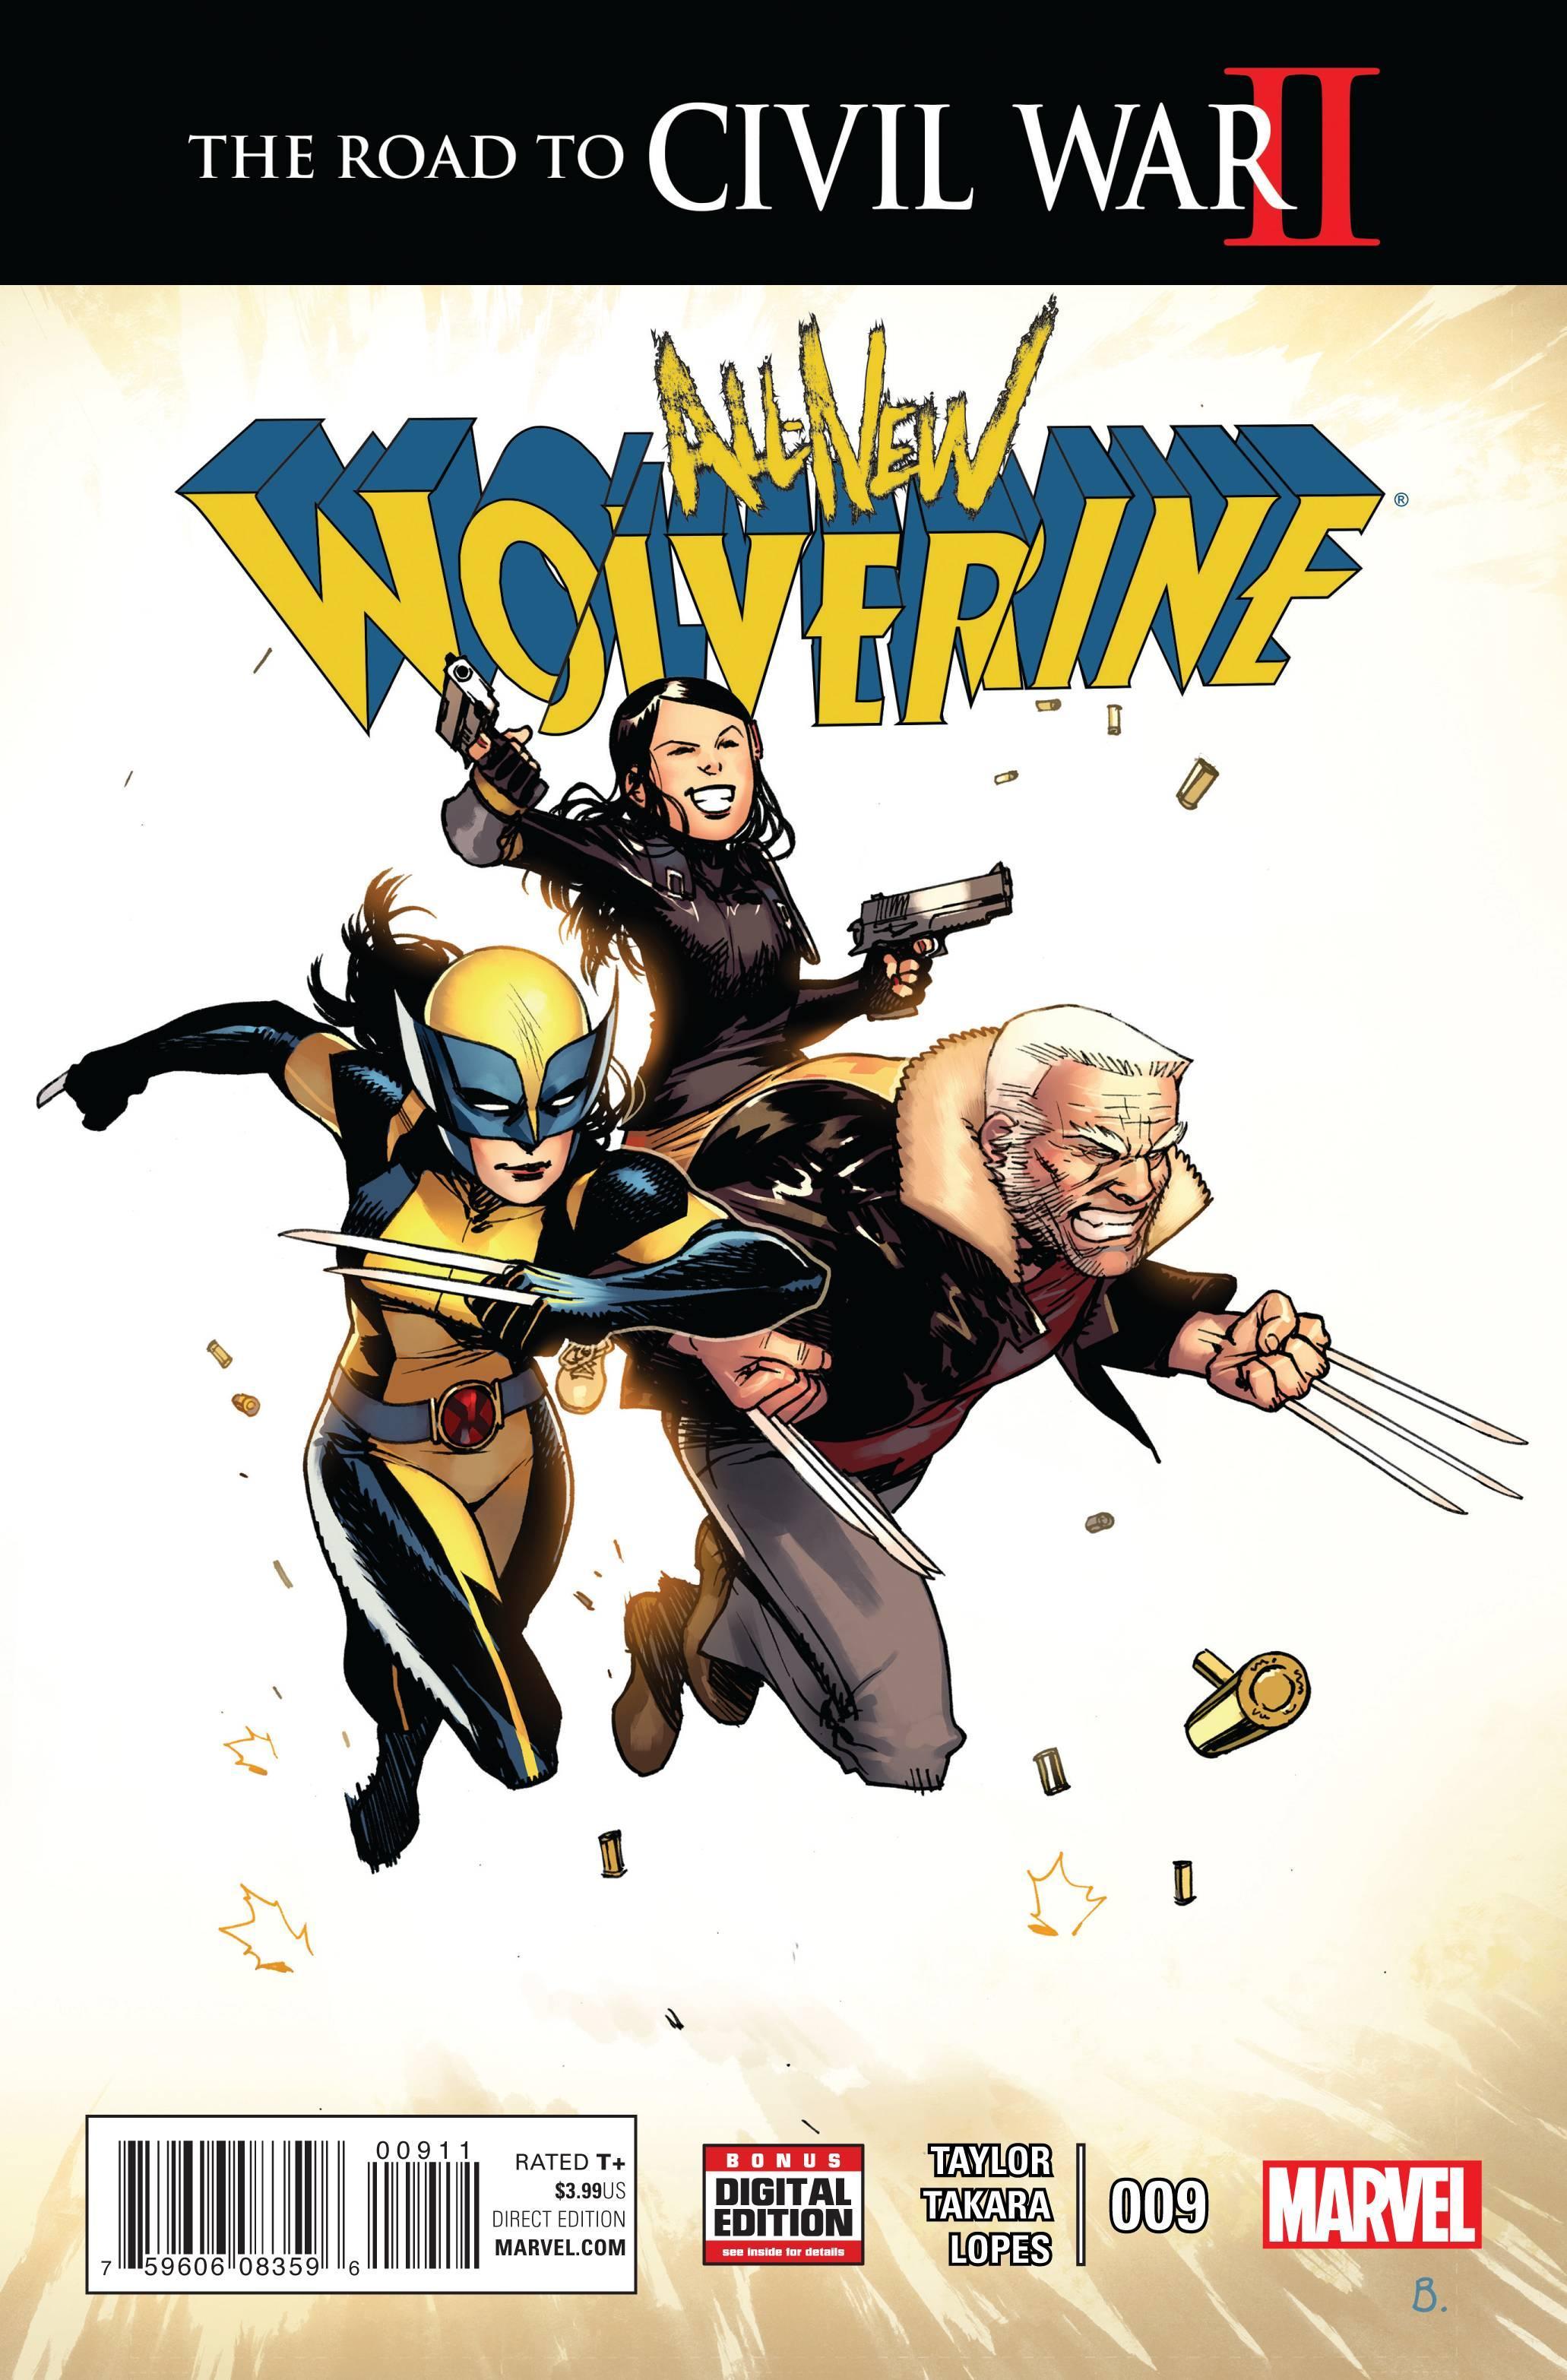 ALL NEW WOLVERINE #9 - Kings Comics